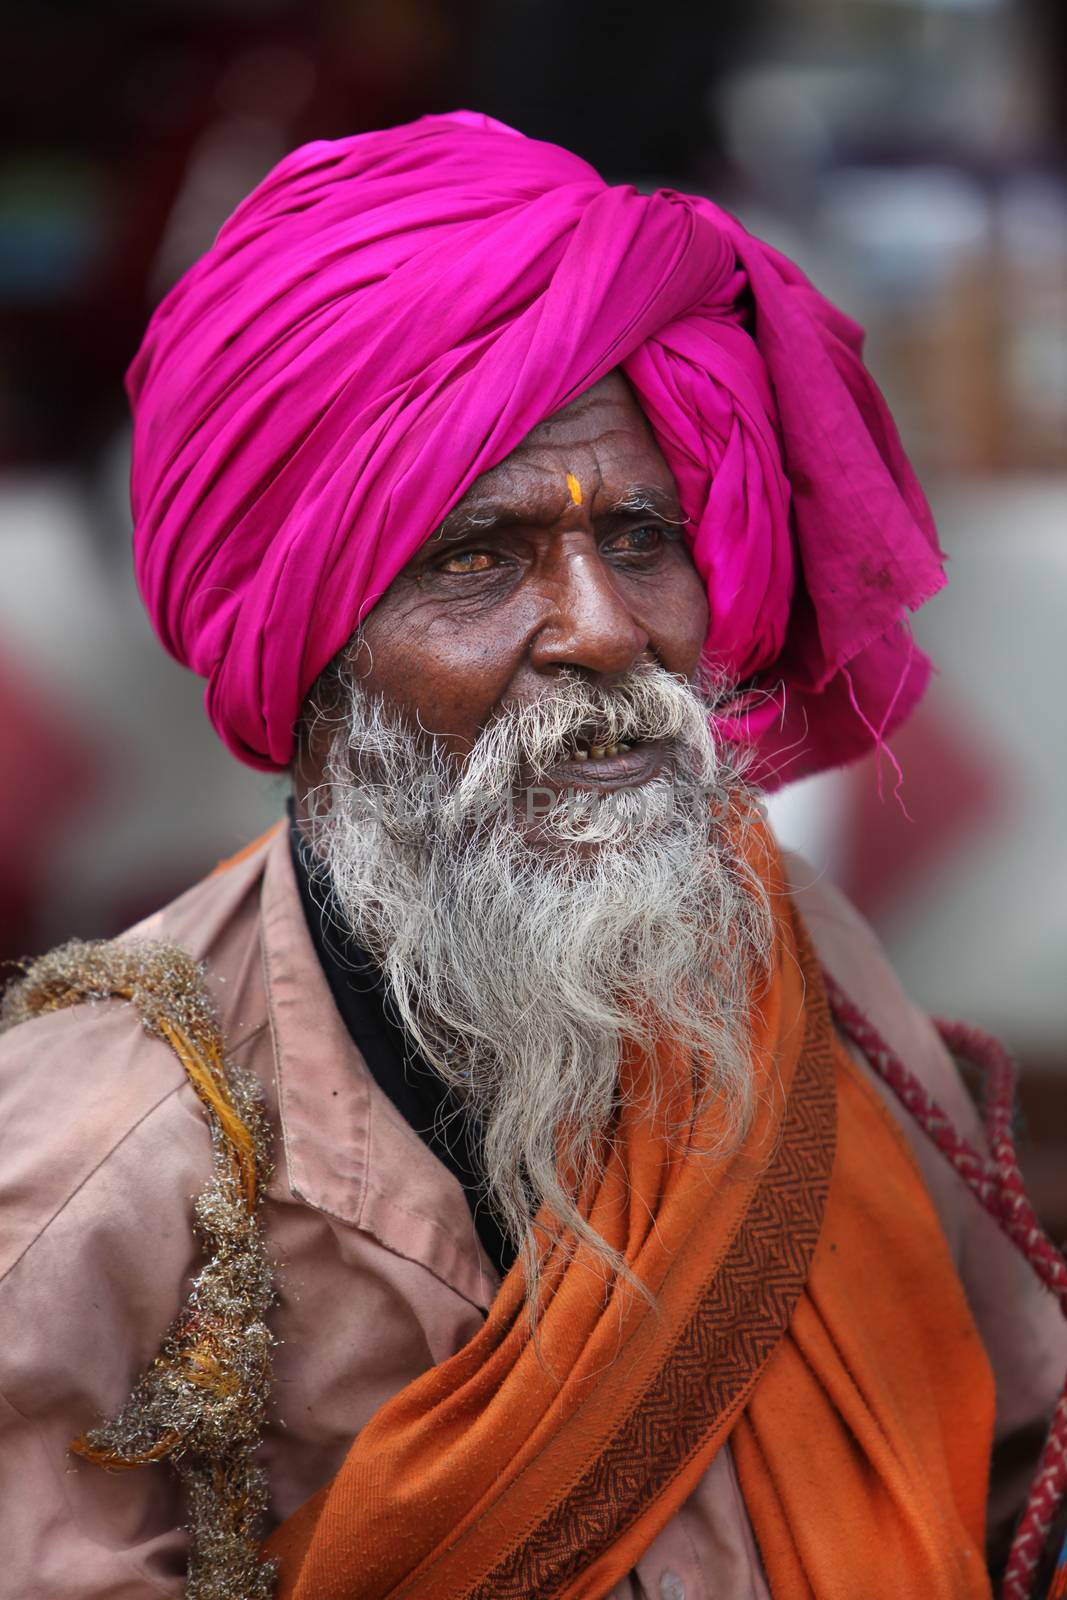 Pune, India  - ‎July 11, ‎2015: An Indian pilgrim of the hindu tradition with a blind eye on his way to a pilgrimmage in India during Wari festival